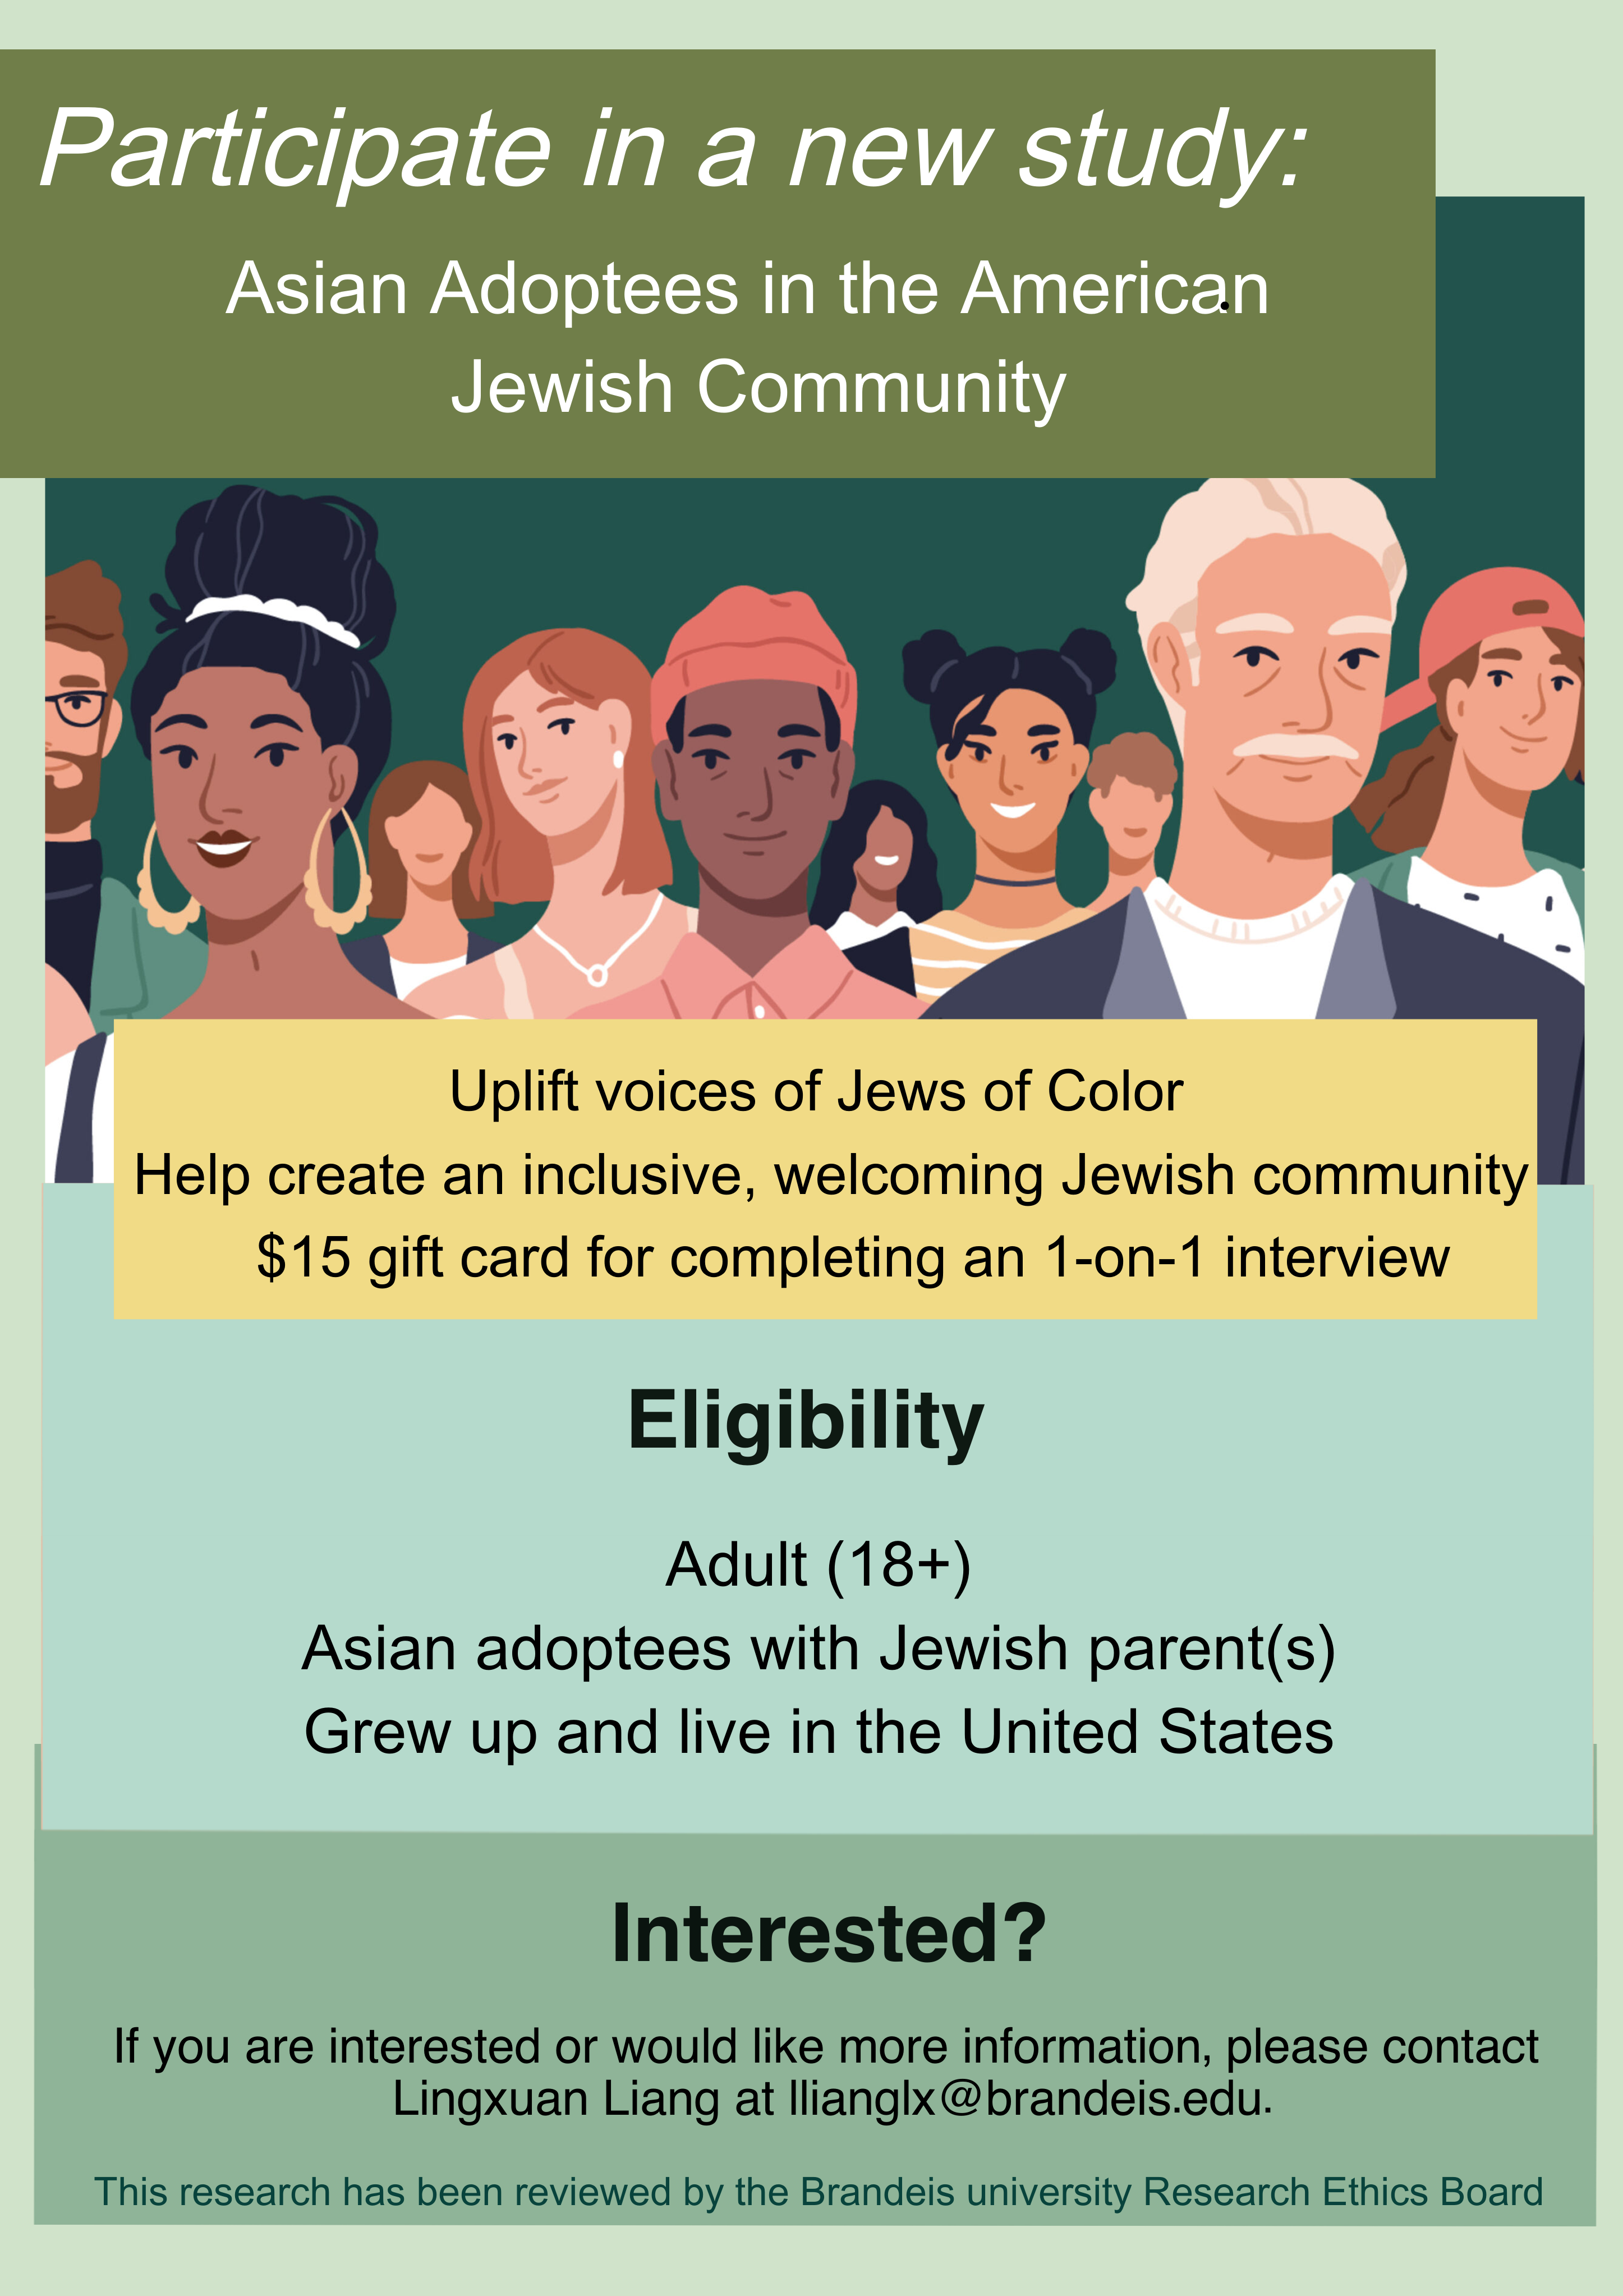 Participate in a new study: Asian Adoptees in the American Jewish community; eligibility age 18+, grew up with Jewish parent(s); Interested? email llianglx@brandeis.edu to sign up!